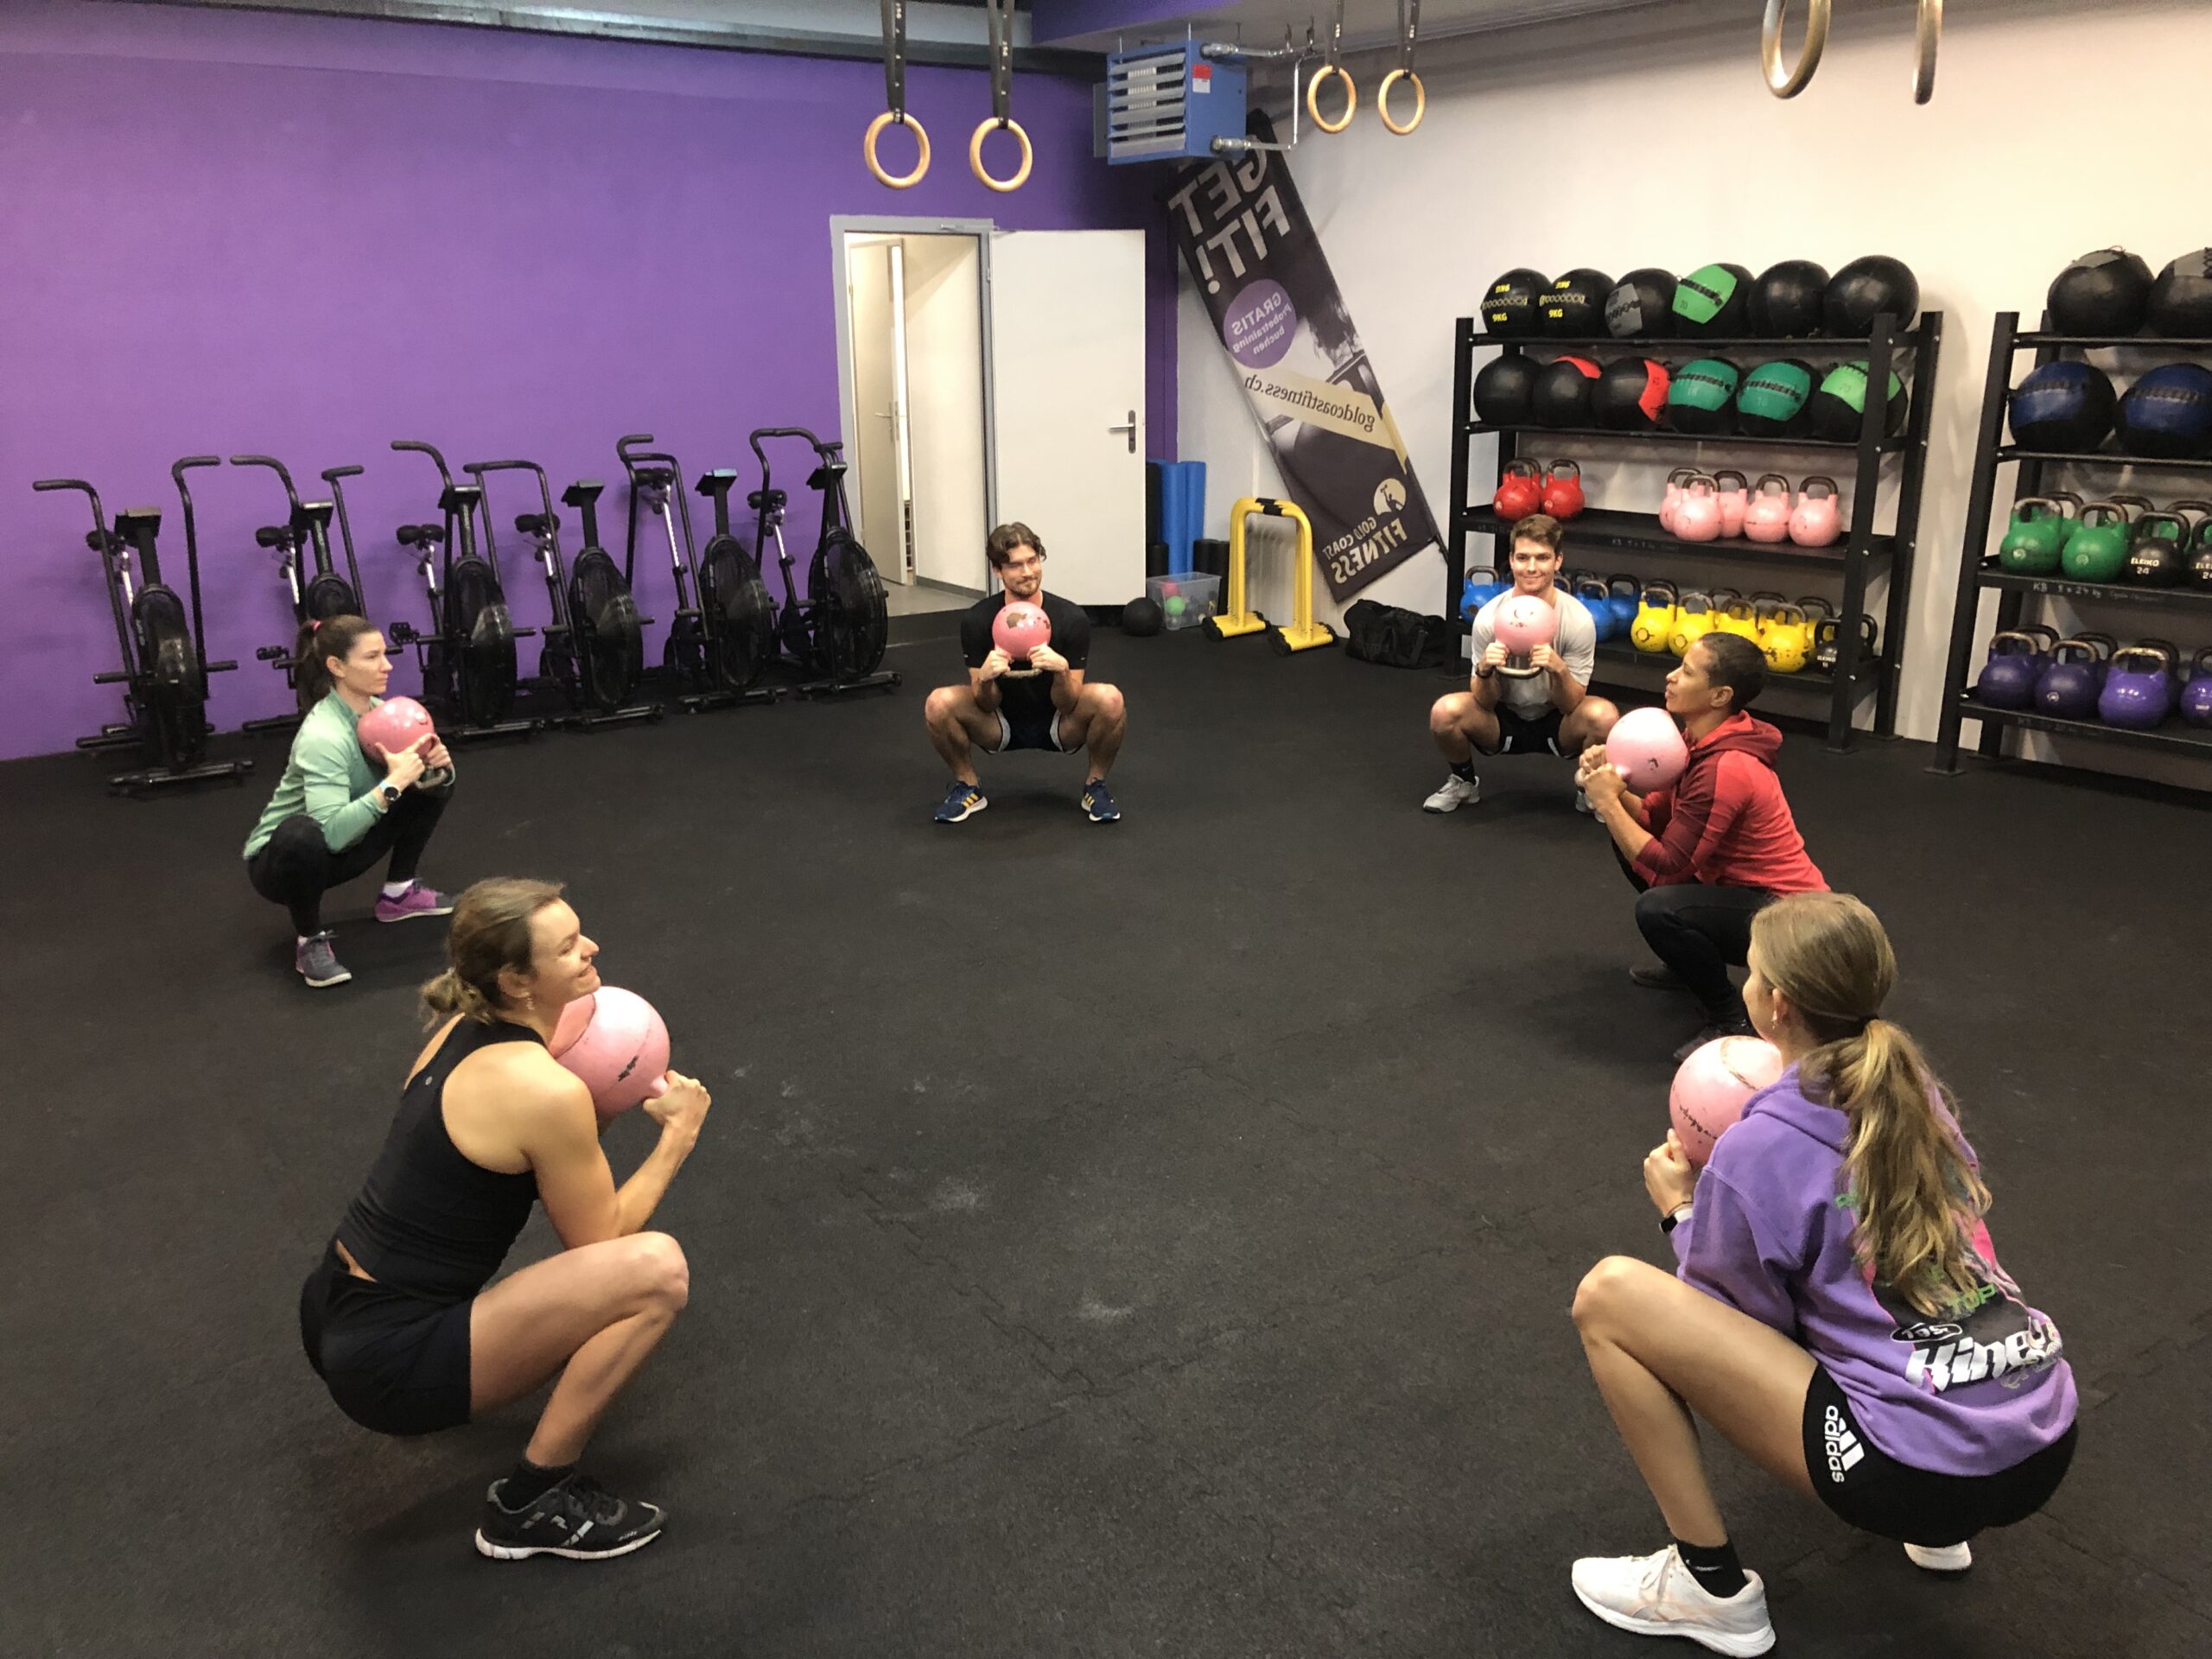 Cross training class doing goblet squats for warm-up